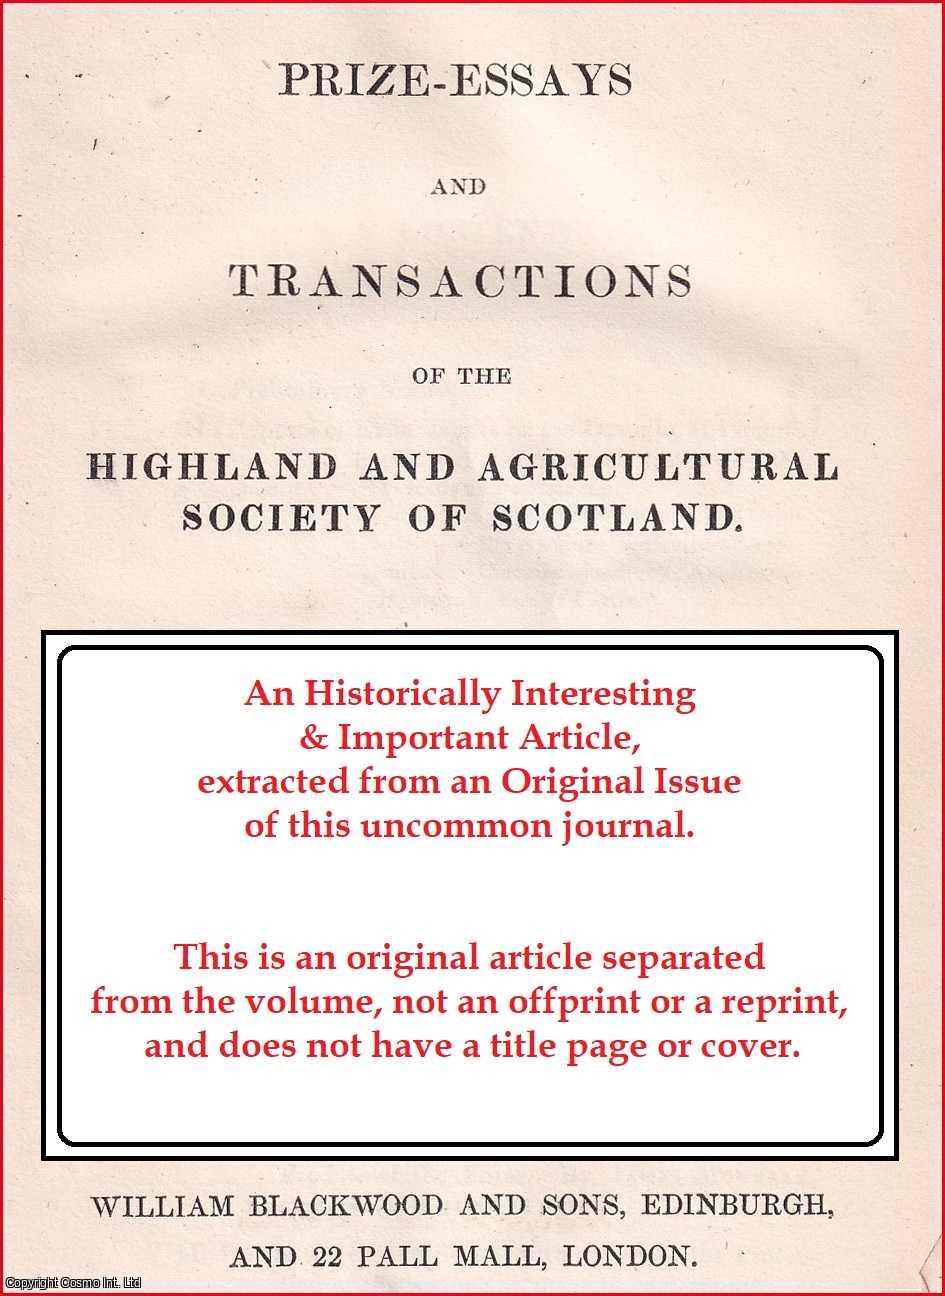 No Author Stated - The Means of Improving the Lodging of the Peasantry. An uncommon original article from the Prize Essays and Transactions of the Highland Society of Scotland, 1841.